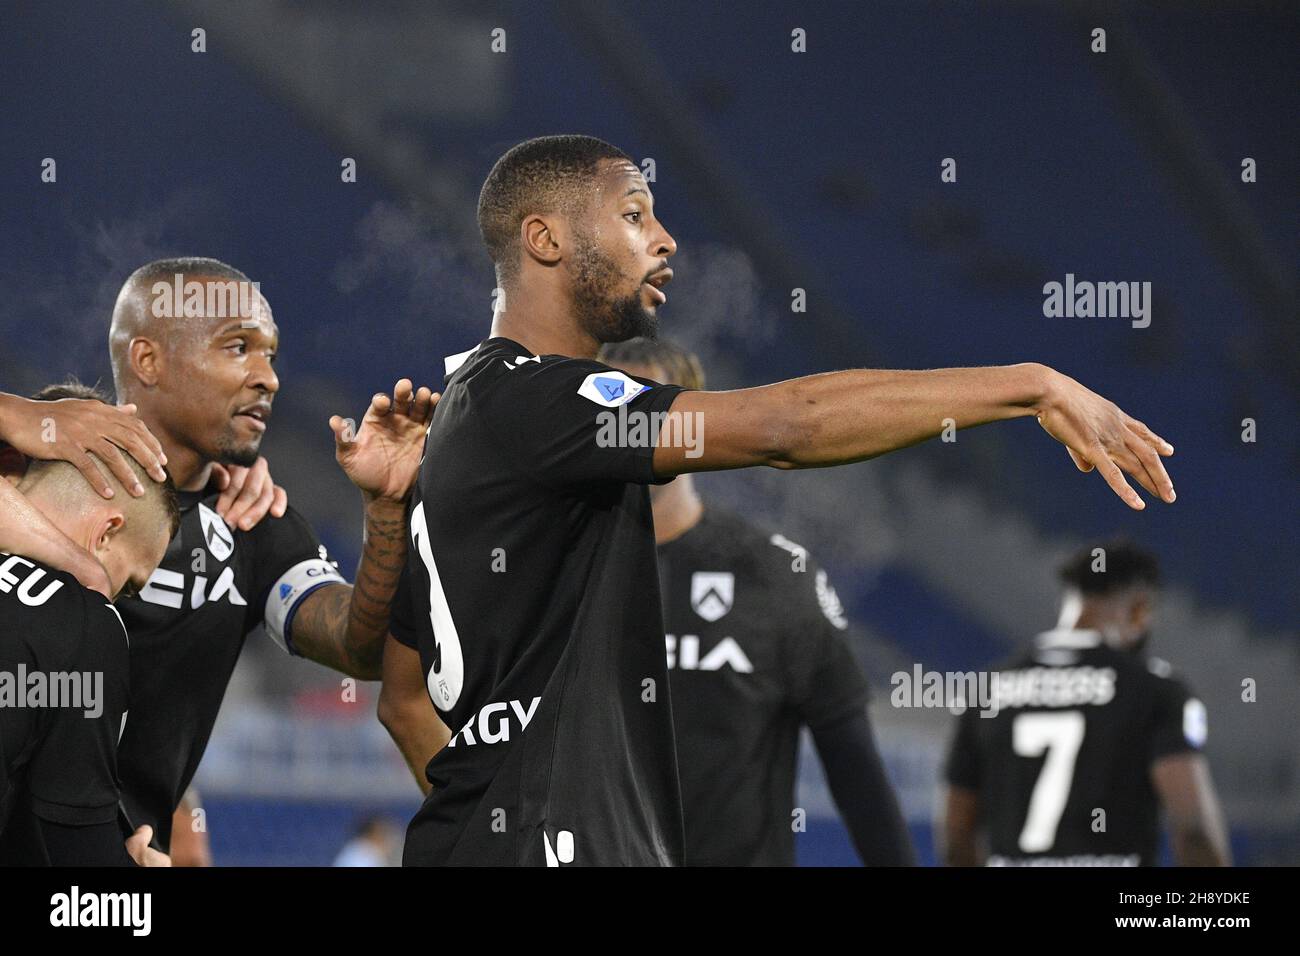 Rome, Italy. 2 December 2021, Norberto Bercique Gomes Betuncal (Udinese) celebrates after scoring the goal 0-1 during the  Italian Football Championship League A 2021/2022 match between SS Lazio vs Udinese Calcio at the Olimpic Stadium in Rome on 02 December 2021. Stock Photo